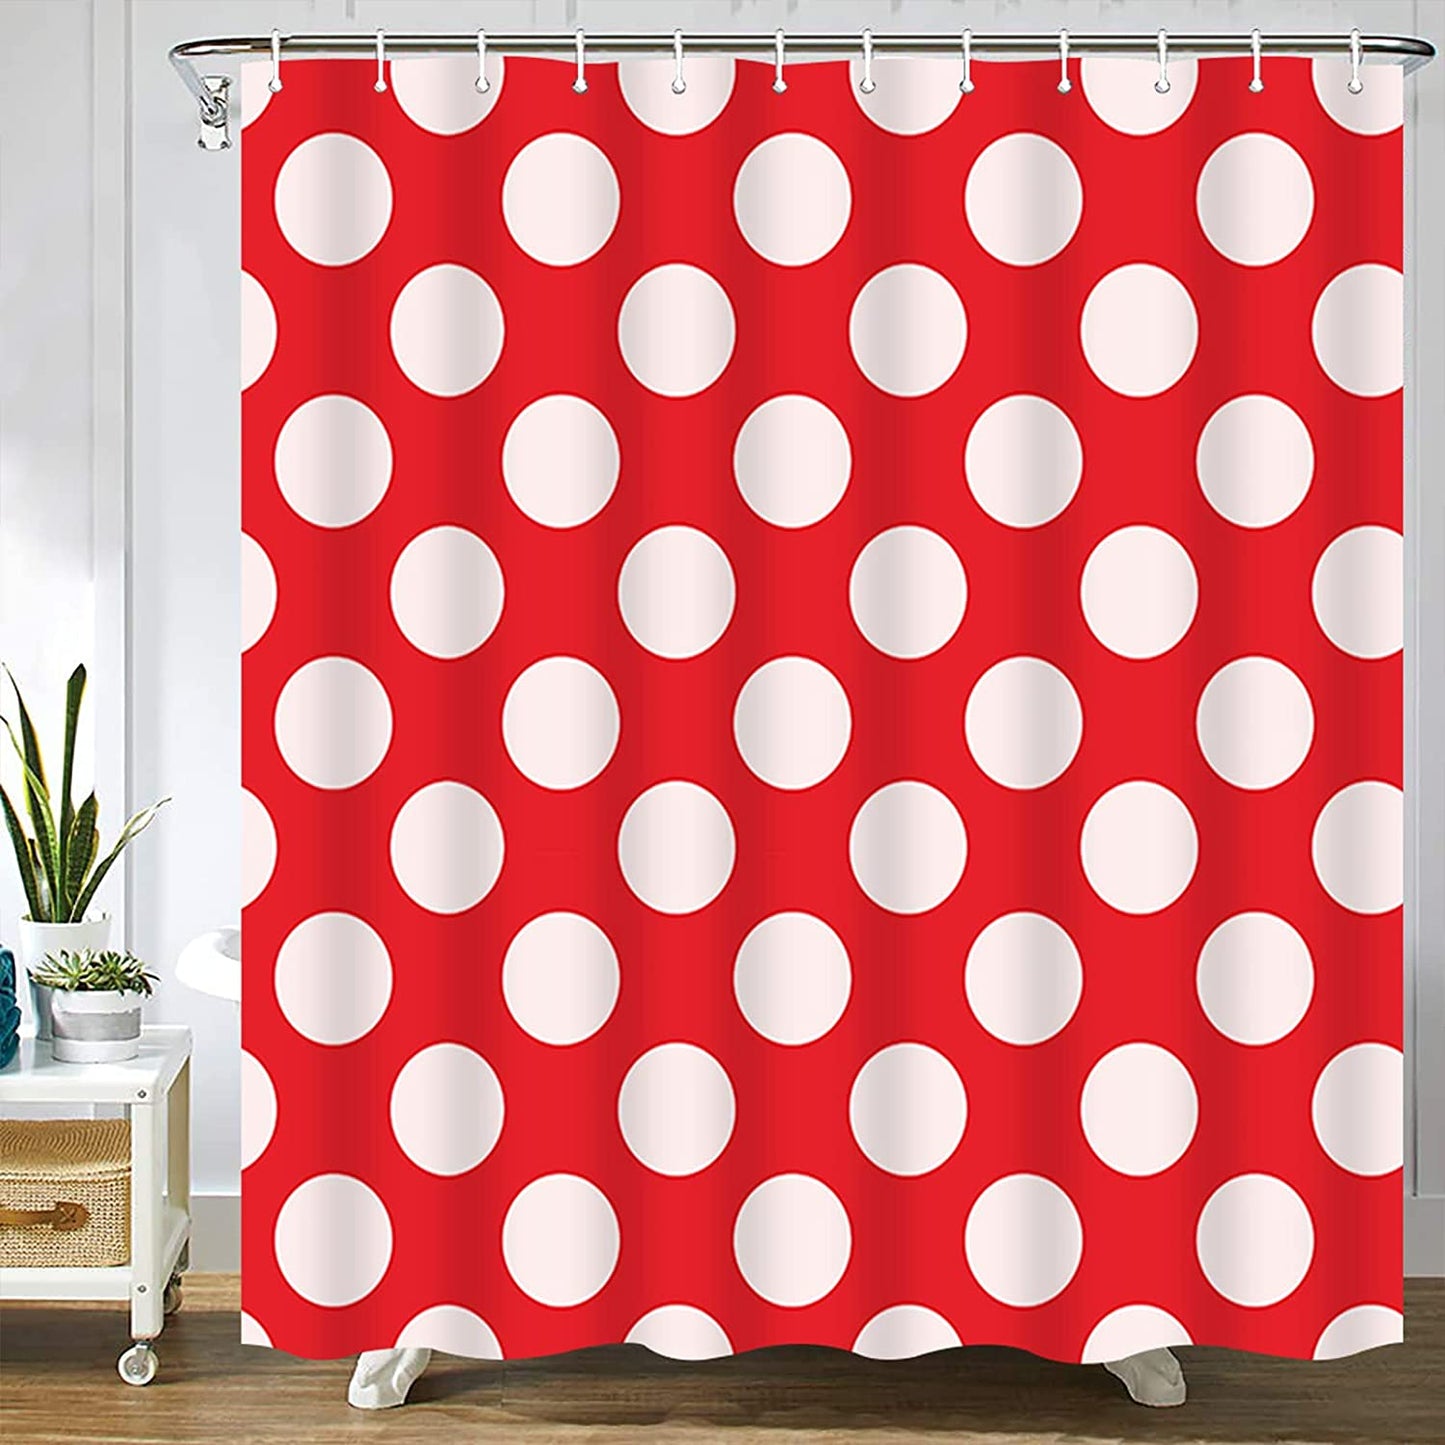 Red with White Polka Dots Shower Curtain